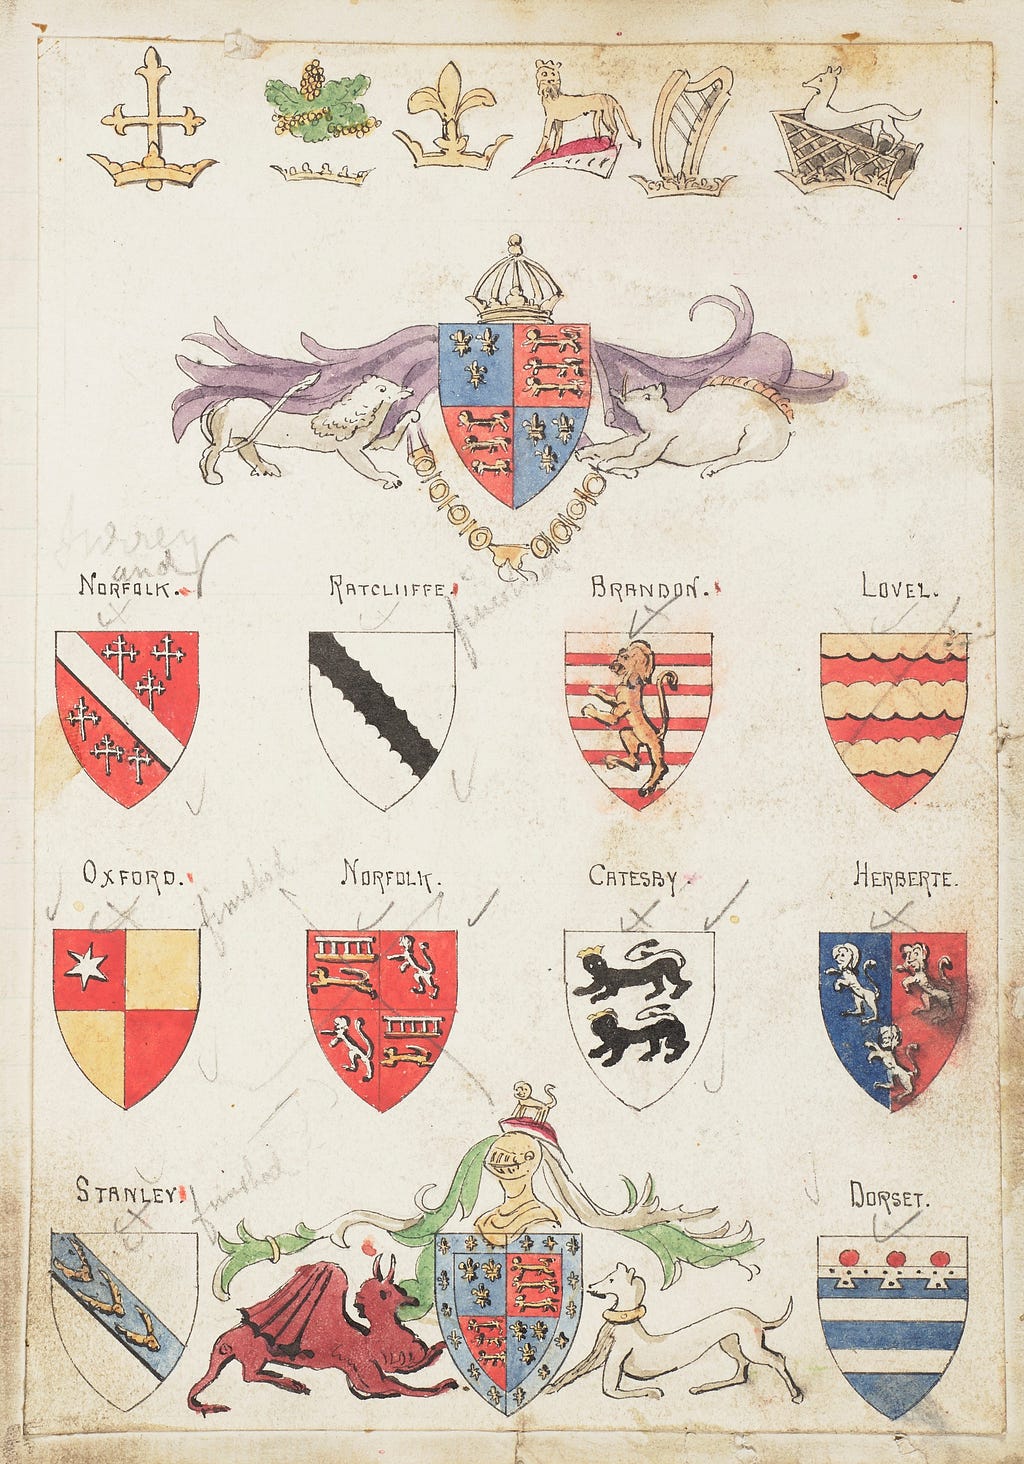 Twelve hand-painted heraldic shields, two with mantles and supporters, in rows of one, four, four, three. Six crests above.